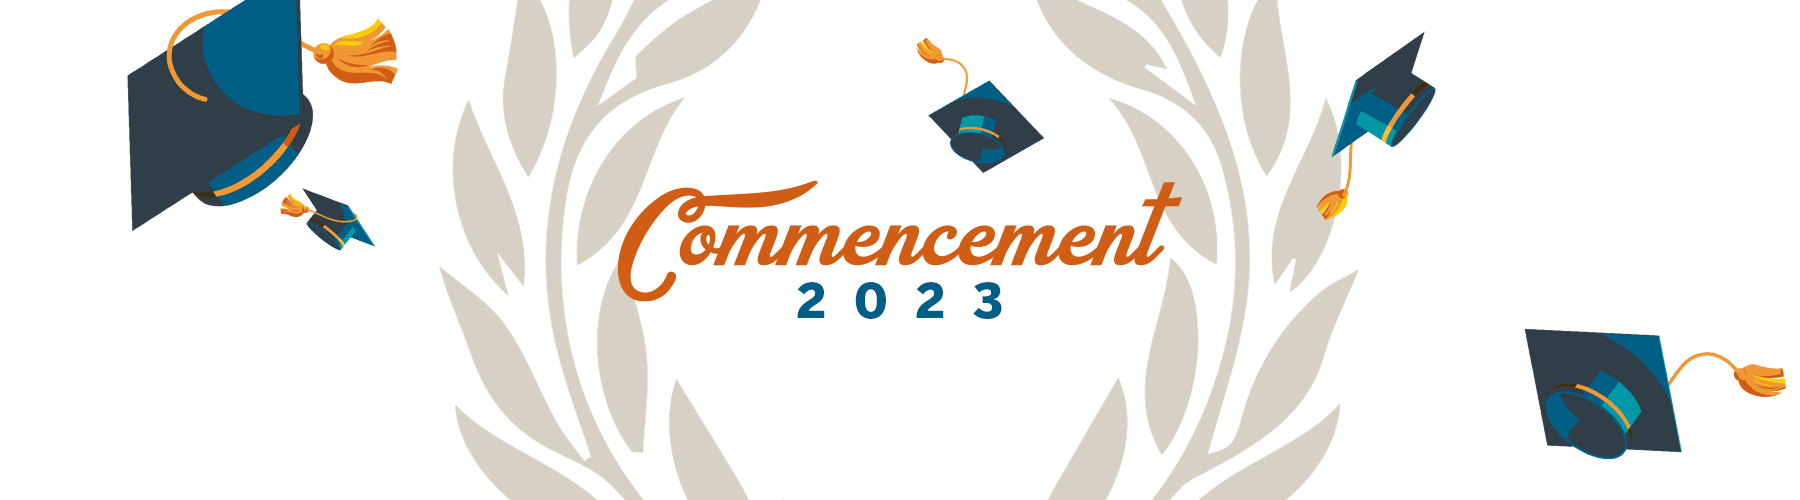 Graphic for Commencement 2023